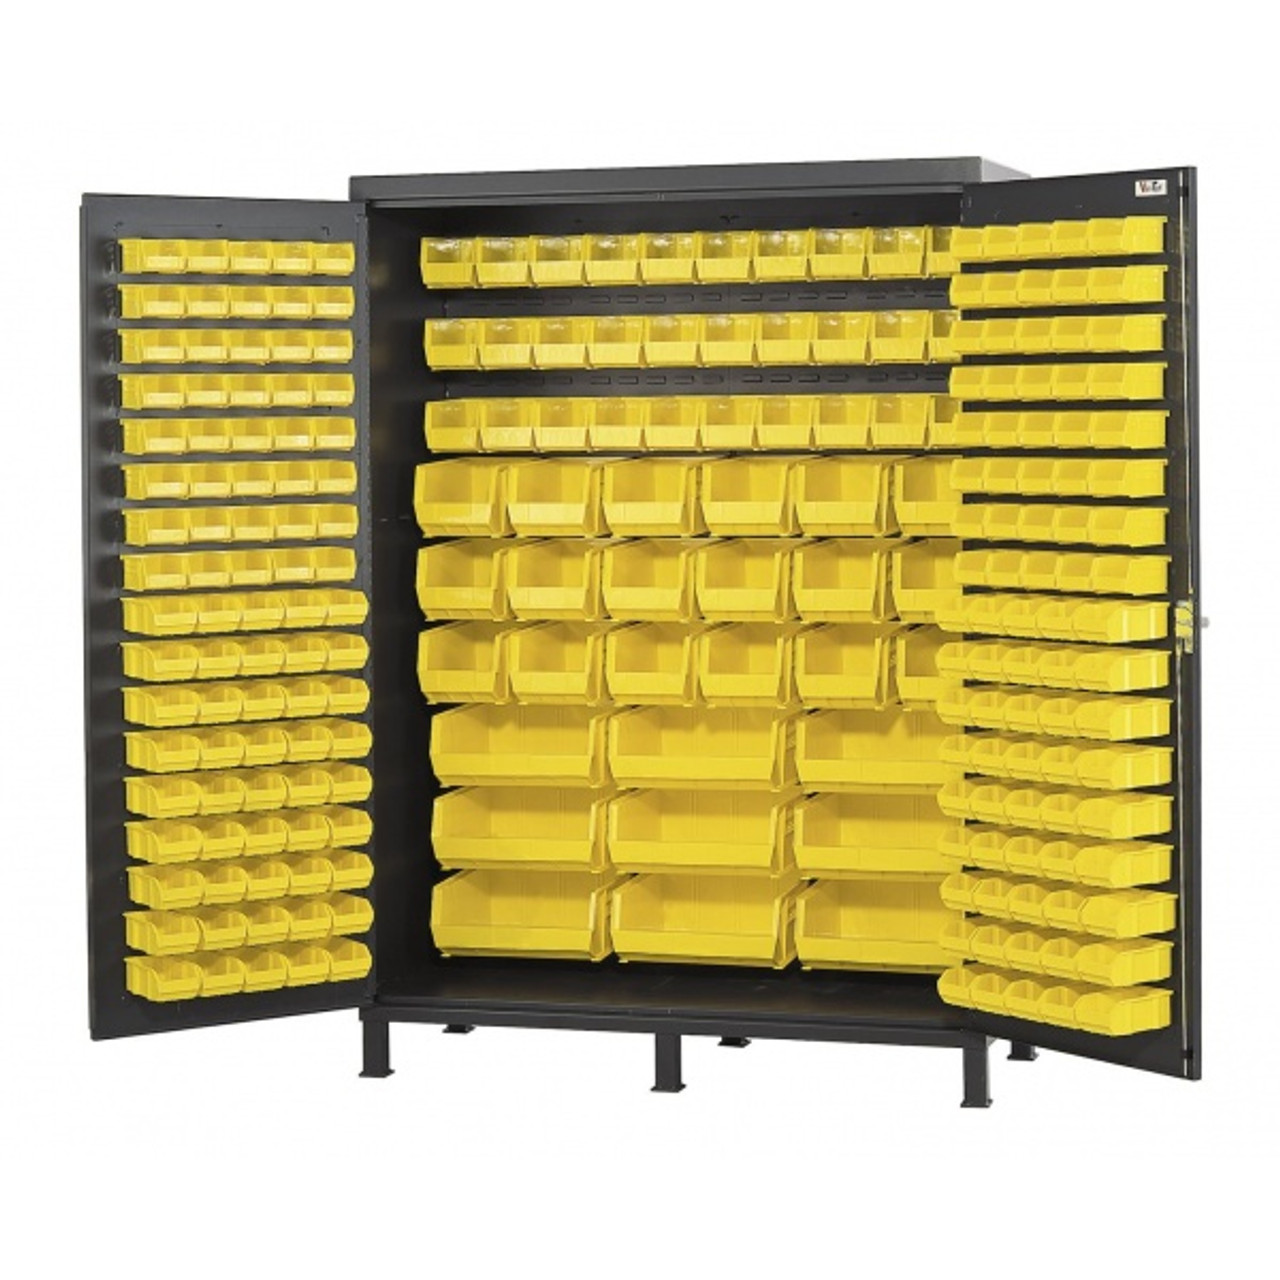 Valley Craft Extra Wide Storage Cabinet 60"W X 24"D X 84"H - includes 227 Bins(CALL FOR BEST PRICING)